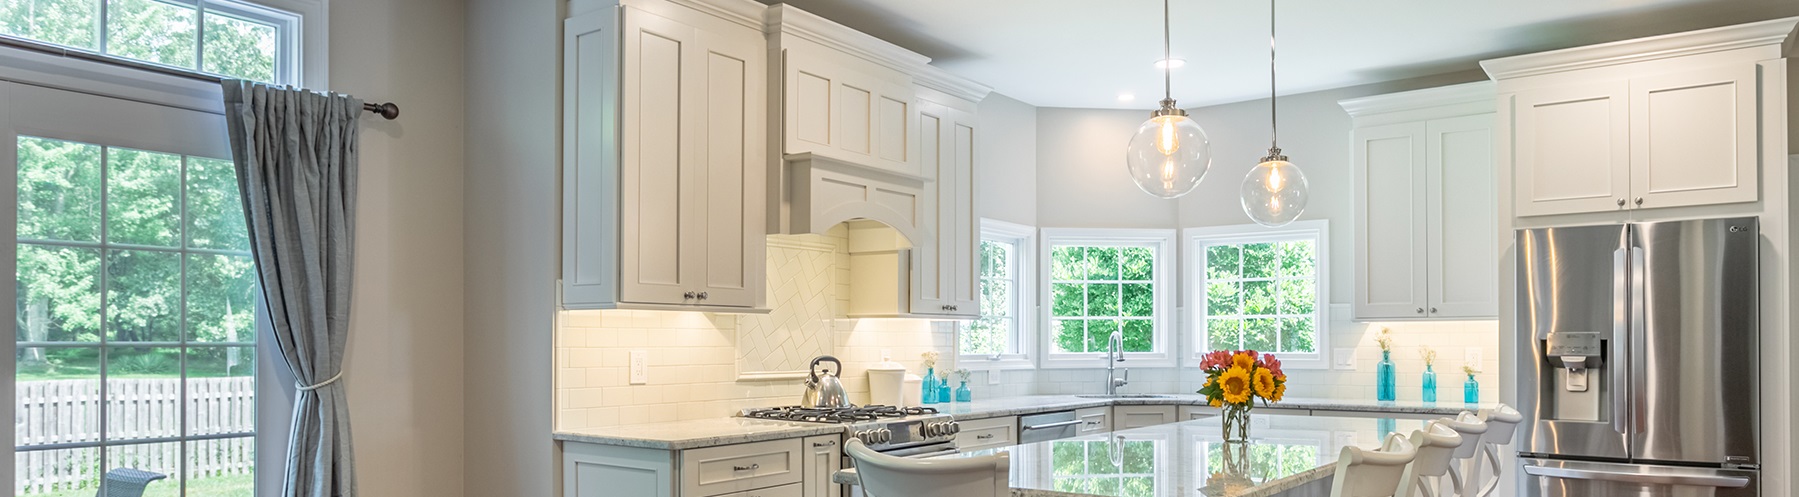 Kitchen with white cabinets from amiano and son